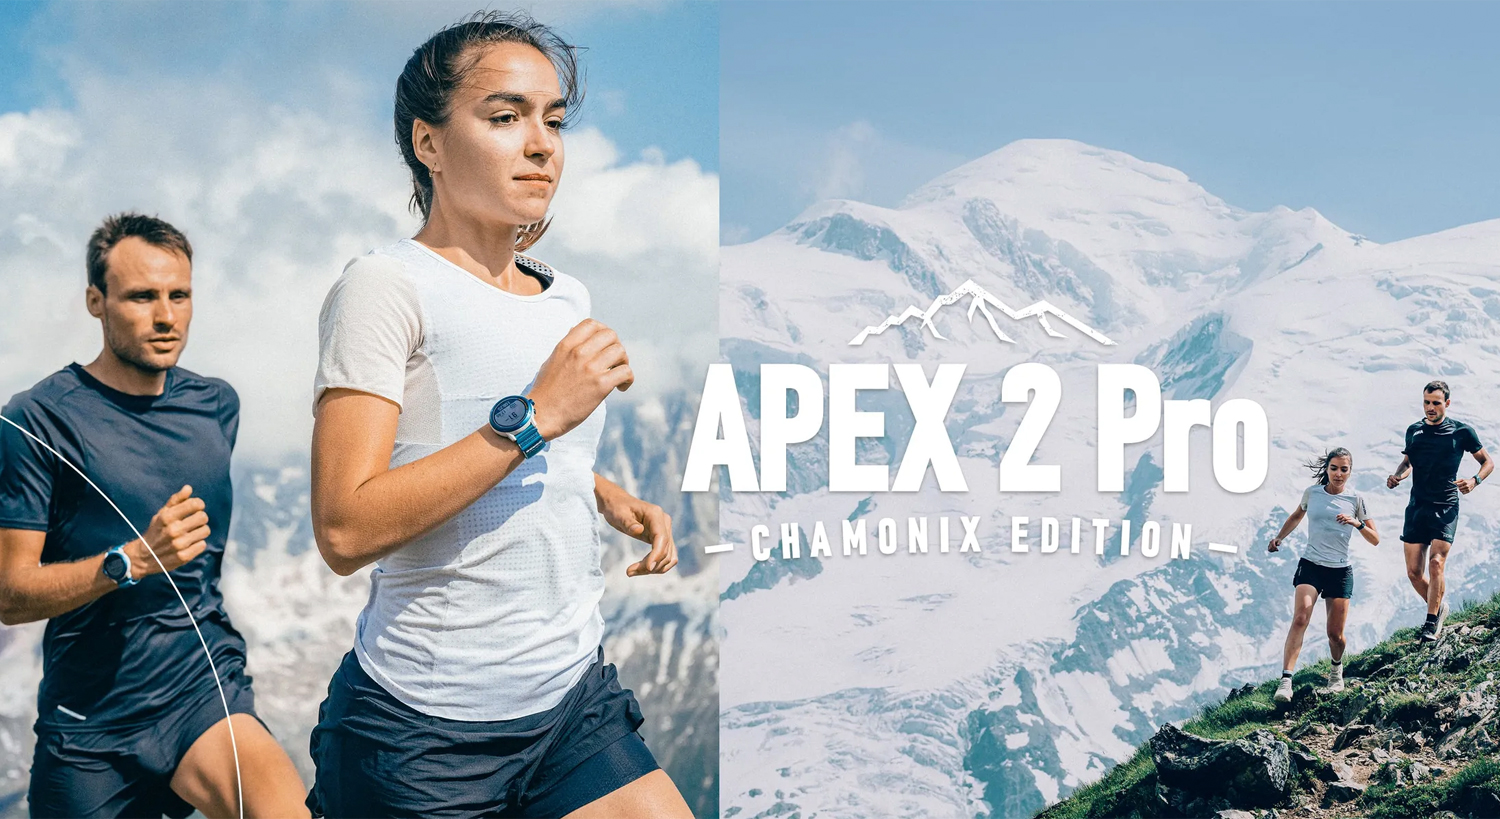 Coros Launches The Apex 2 and Apex 2 Pro and They're Beautiful